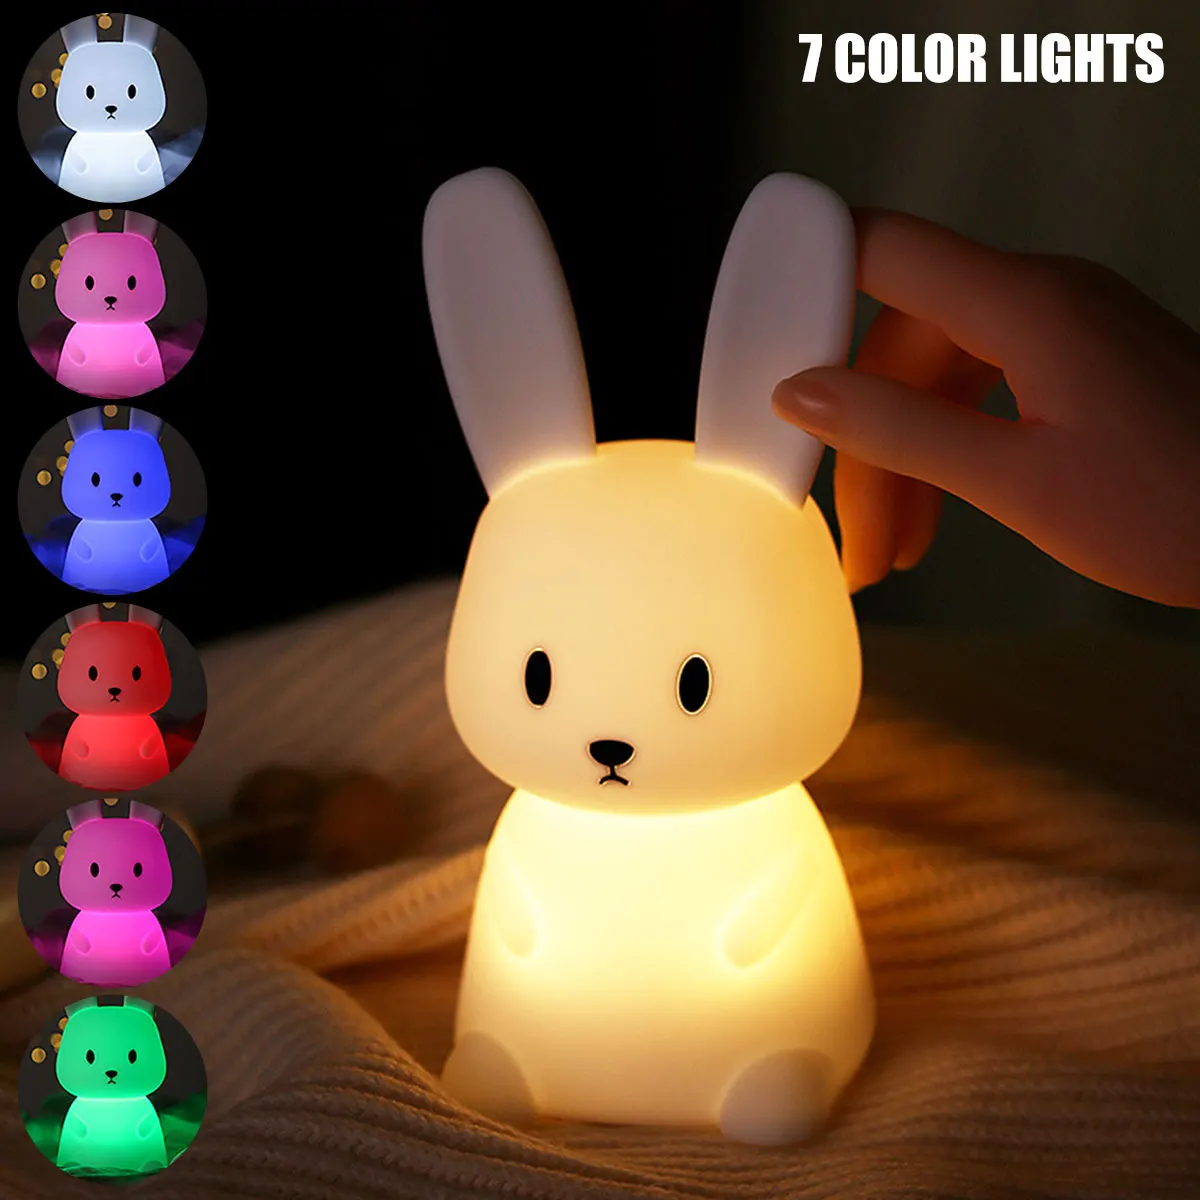 

New LED Silicone Night Light Touch Sensor Switching Pat Lamp Cute Rabbit Nursery Lamp Battery Powered USB Bedside Desk Lamp